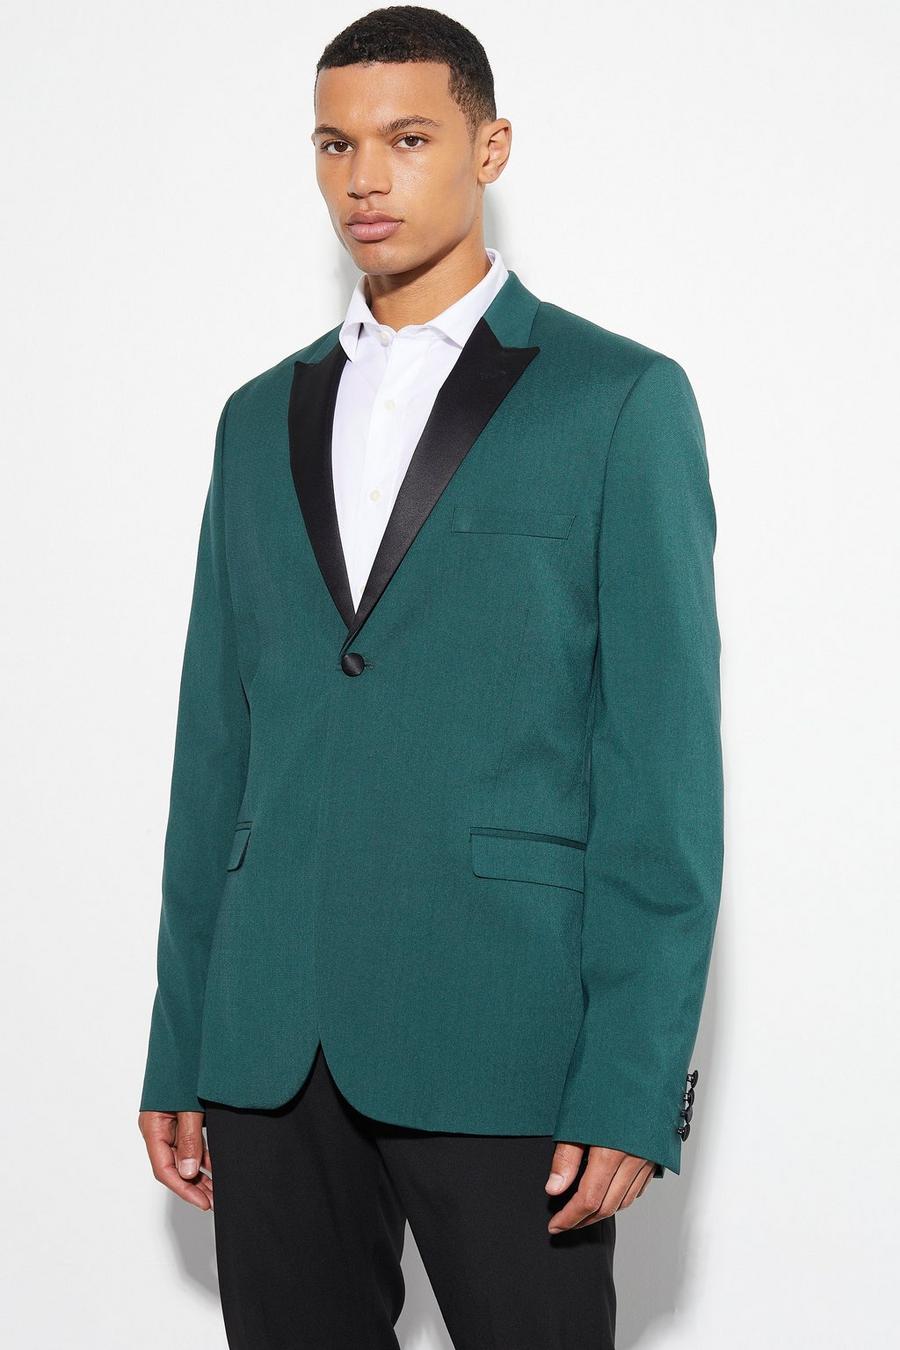 Forest Tall Skinny Tuxedo Single Breasted Suit Jacket